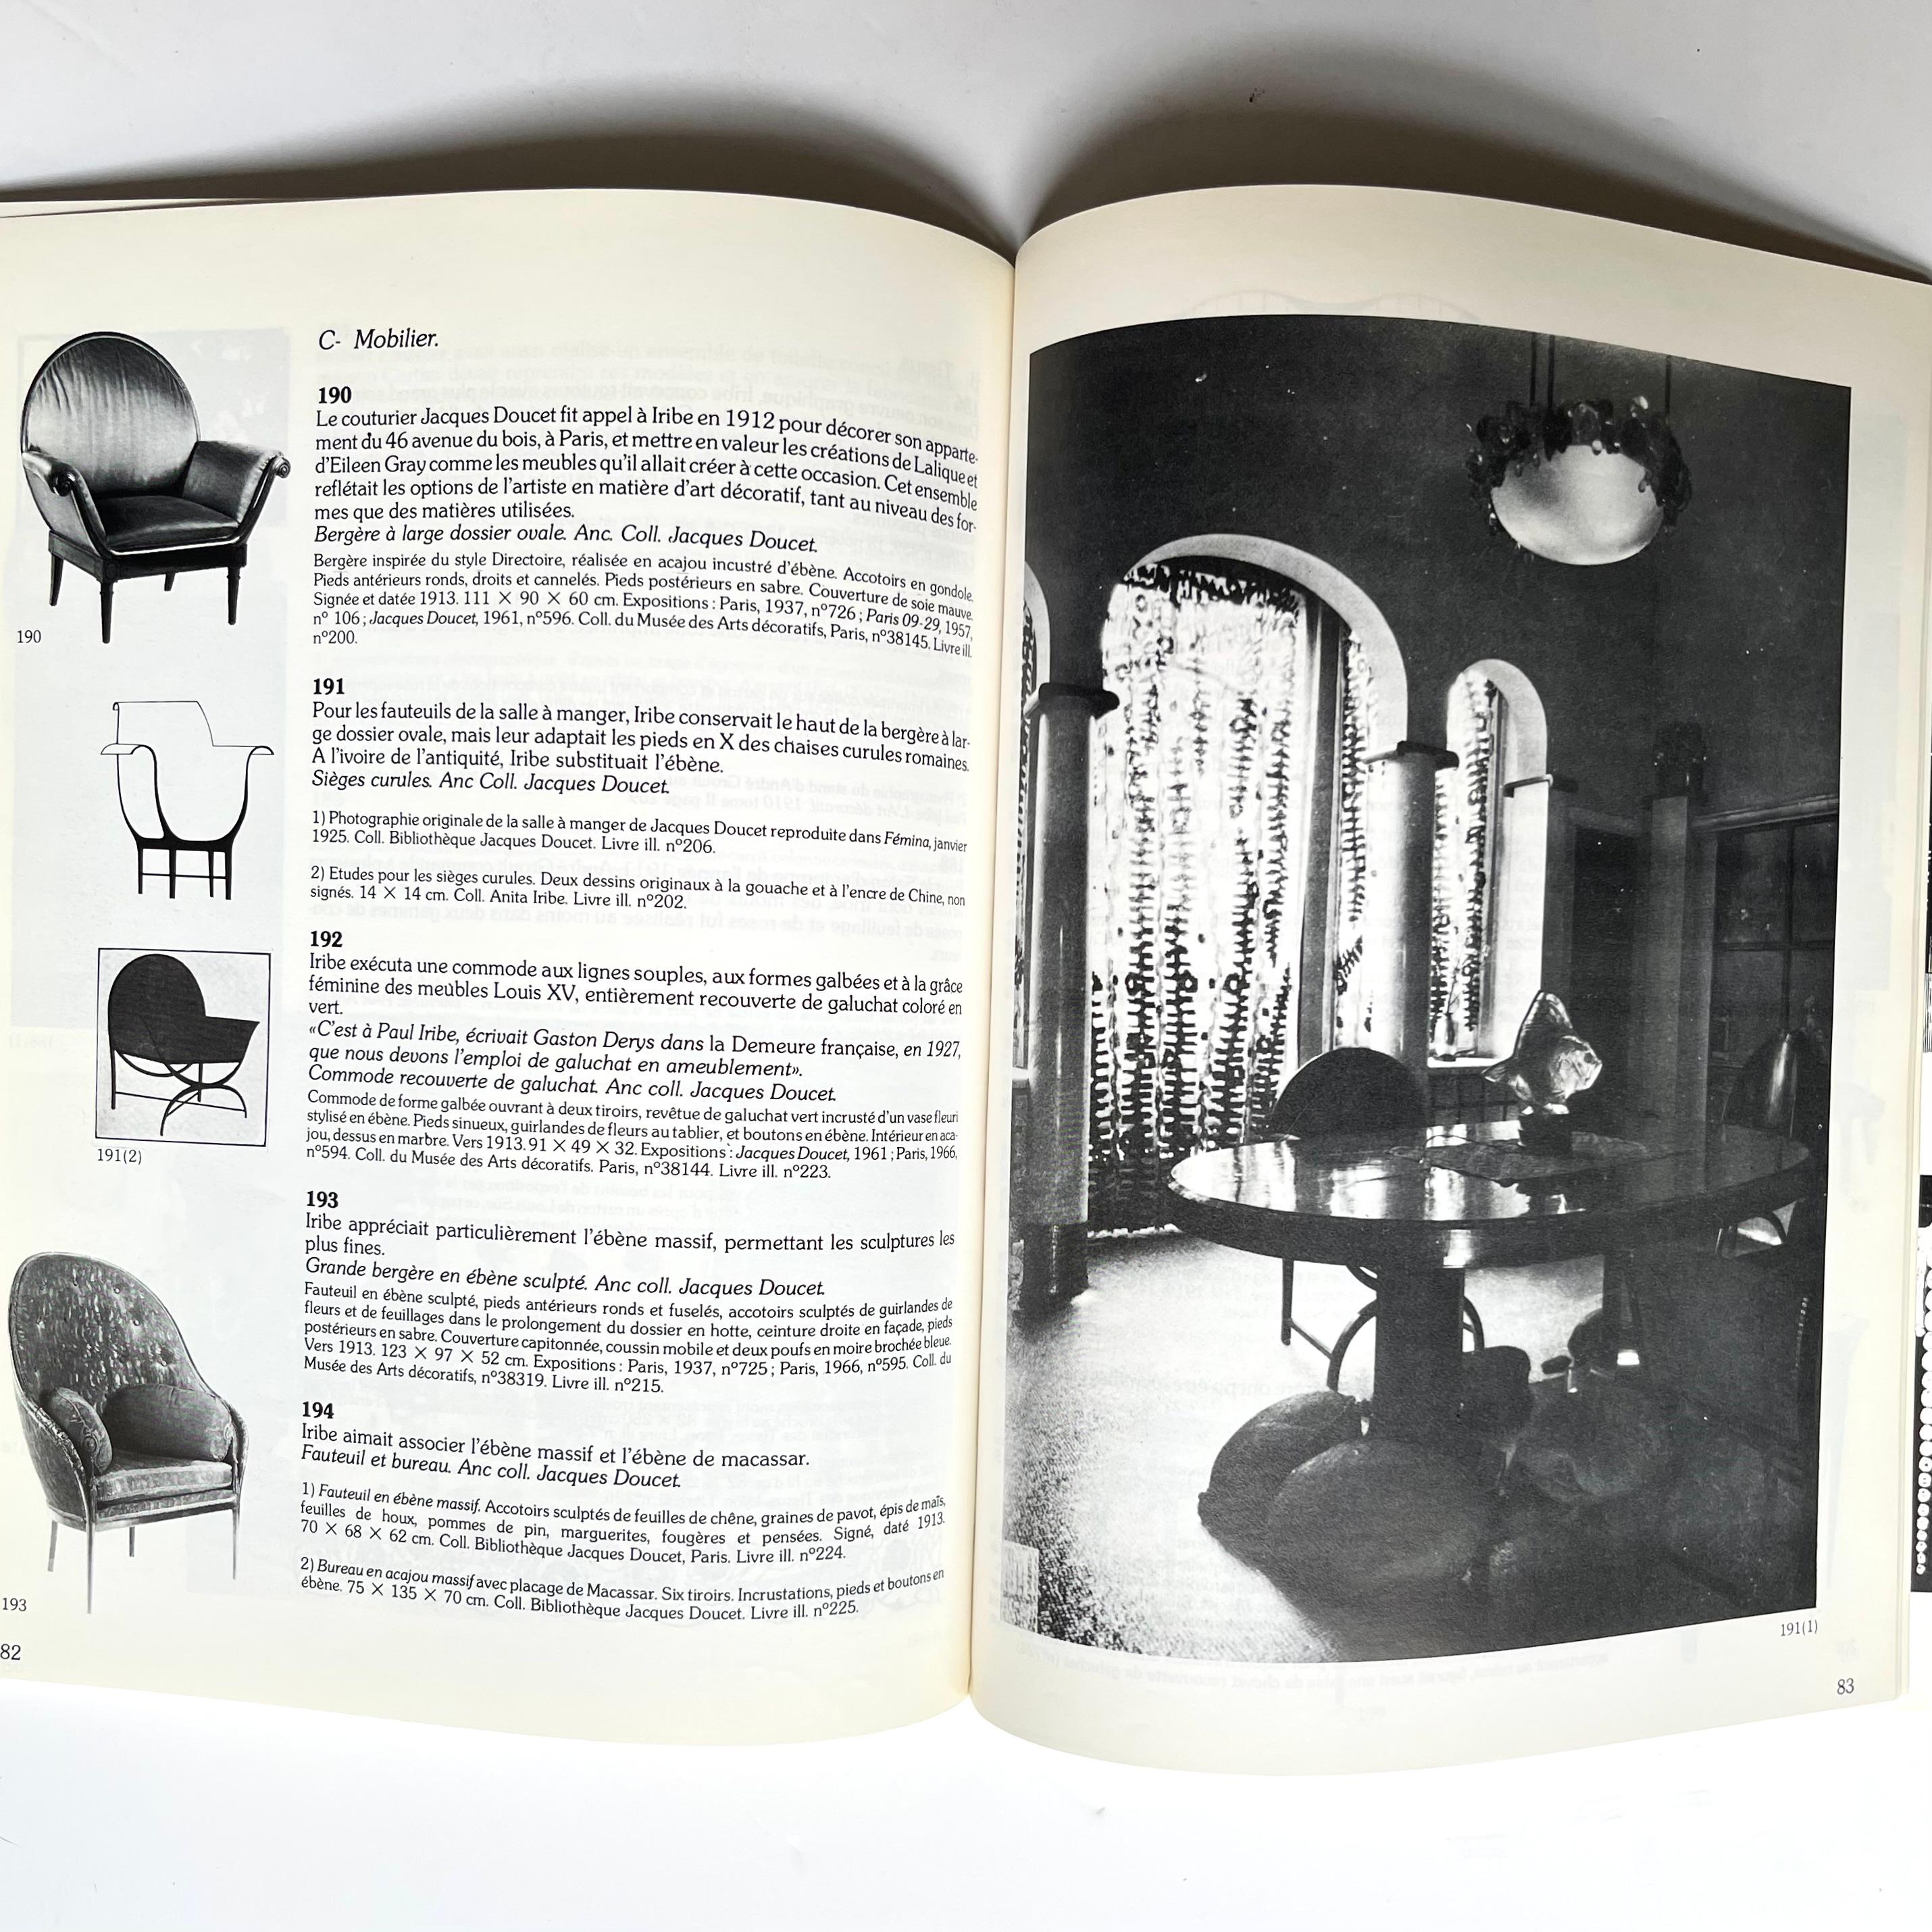 Published in 1983 by Atelier d’imprimerie de Forney. Text in French
Catalogue of the iconic Paul Iribe exhibition which took place from Oct. 6 to Dec. 31. 1983. Texts. Detailed description and history of the exhibited documents showing the influence